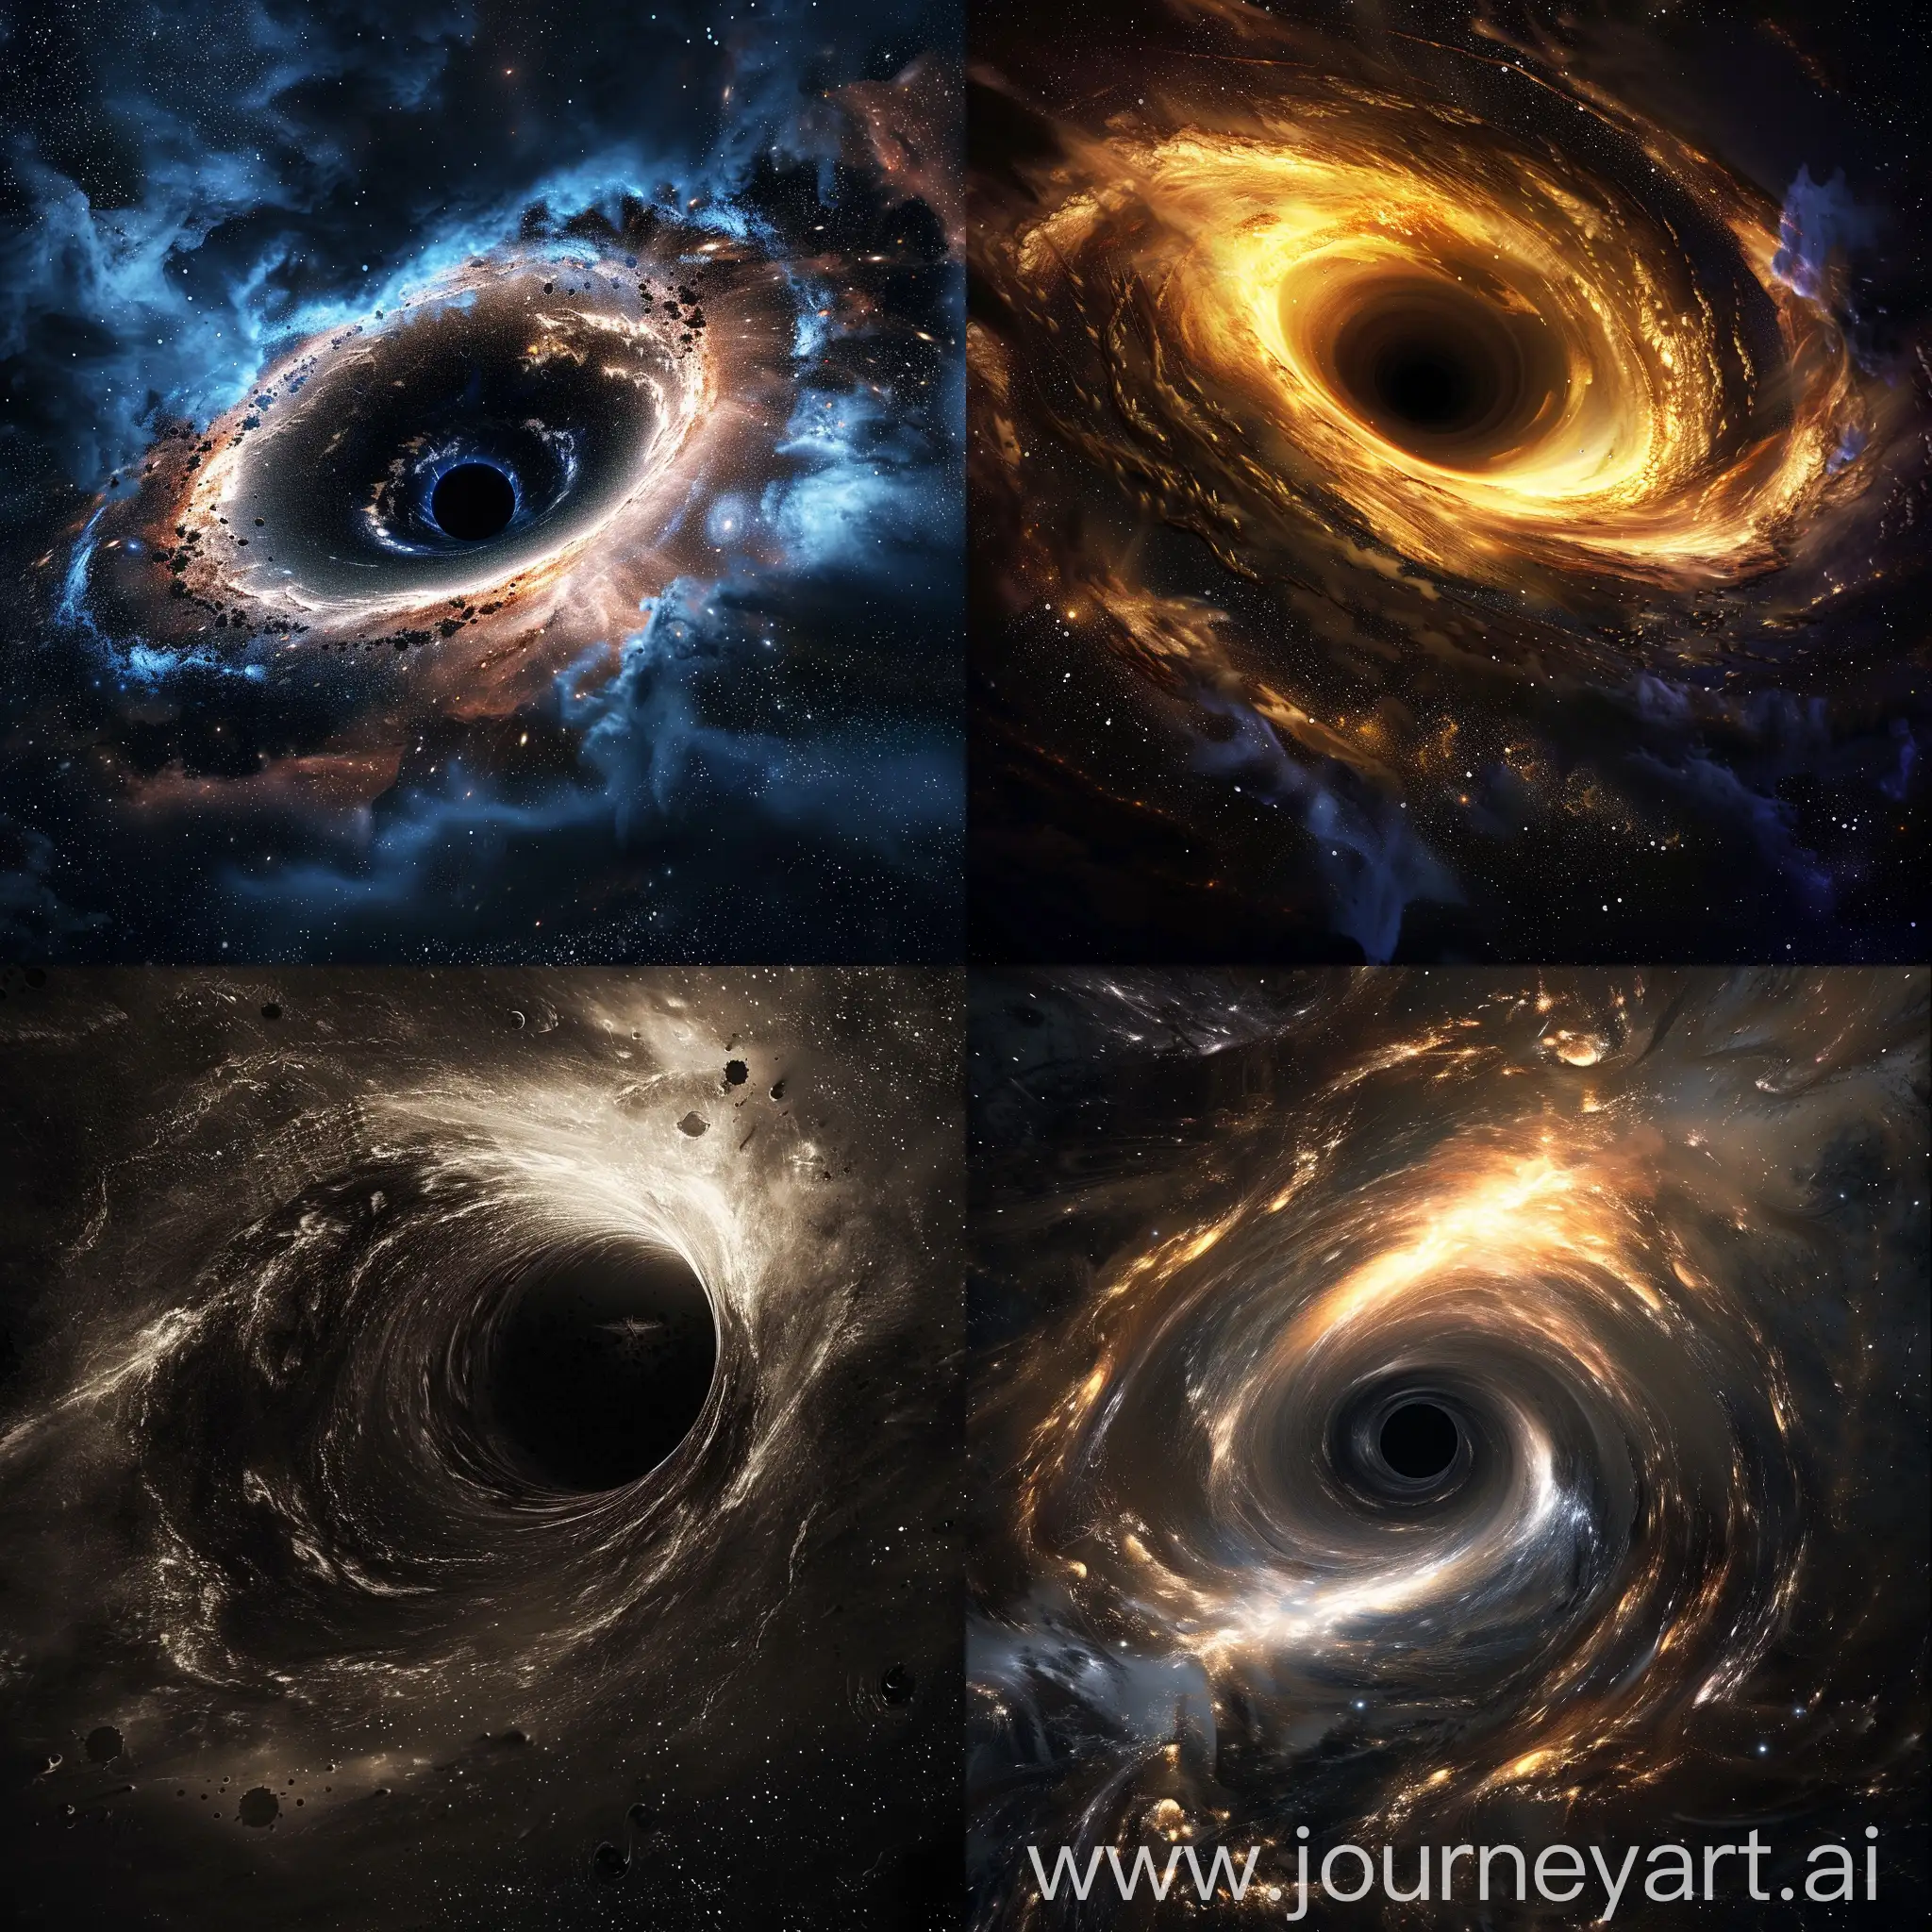 Mesmerizing-Vortex-Exploring-the-Abyss-in-Cosmic-Dimensions